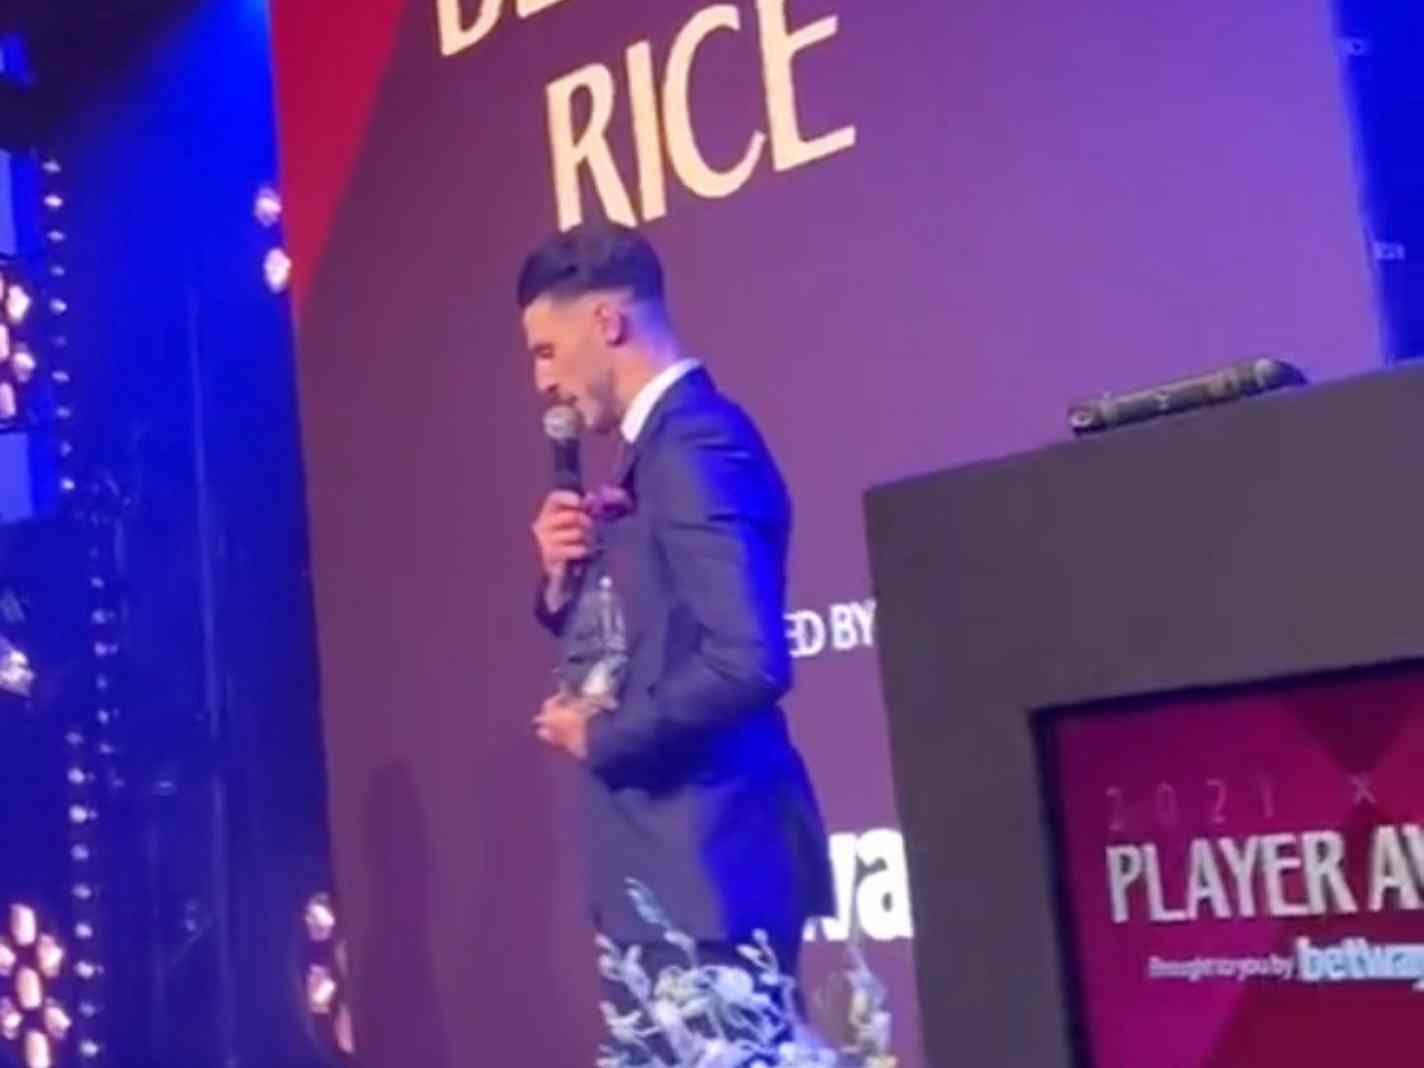 The image shows Declan Rice addressing the audience during Hammer of the Year awards.